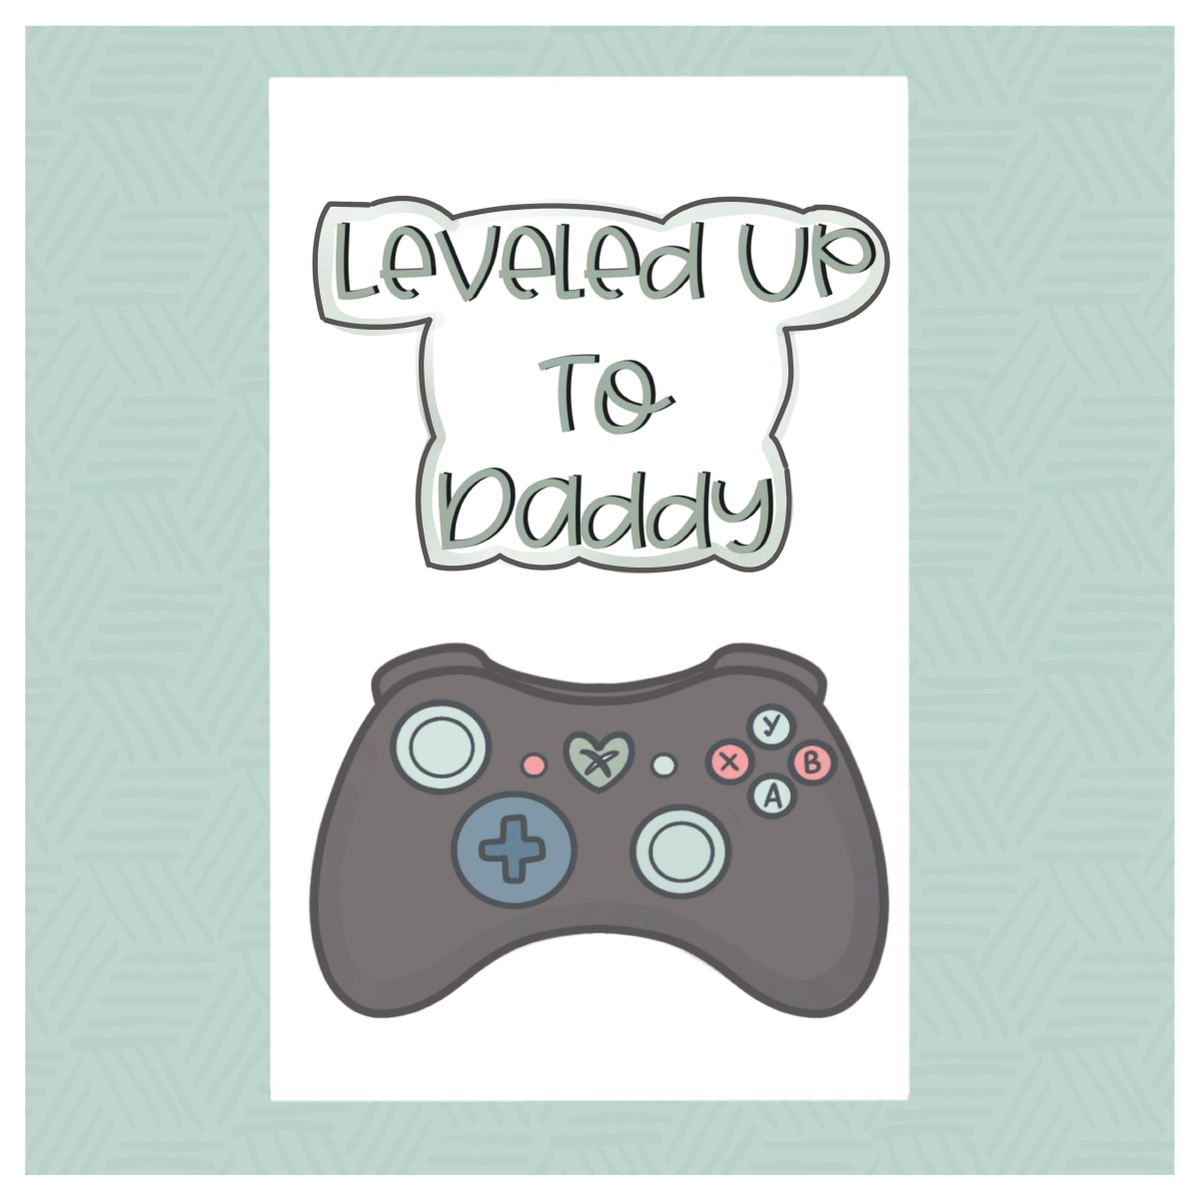 Leveled Up to Daddy 2 Piece Cookie Cutter Set